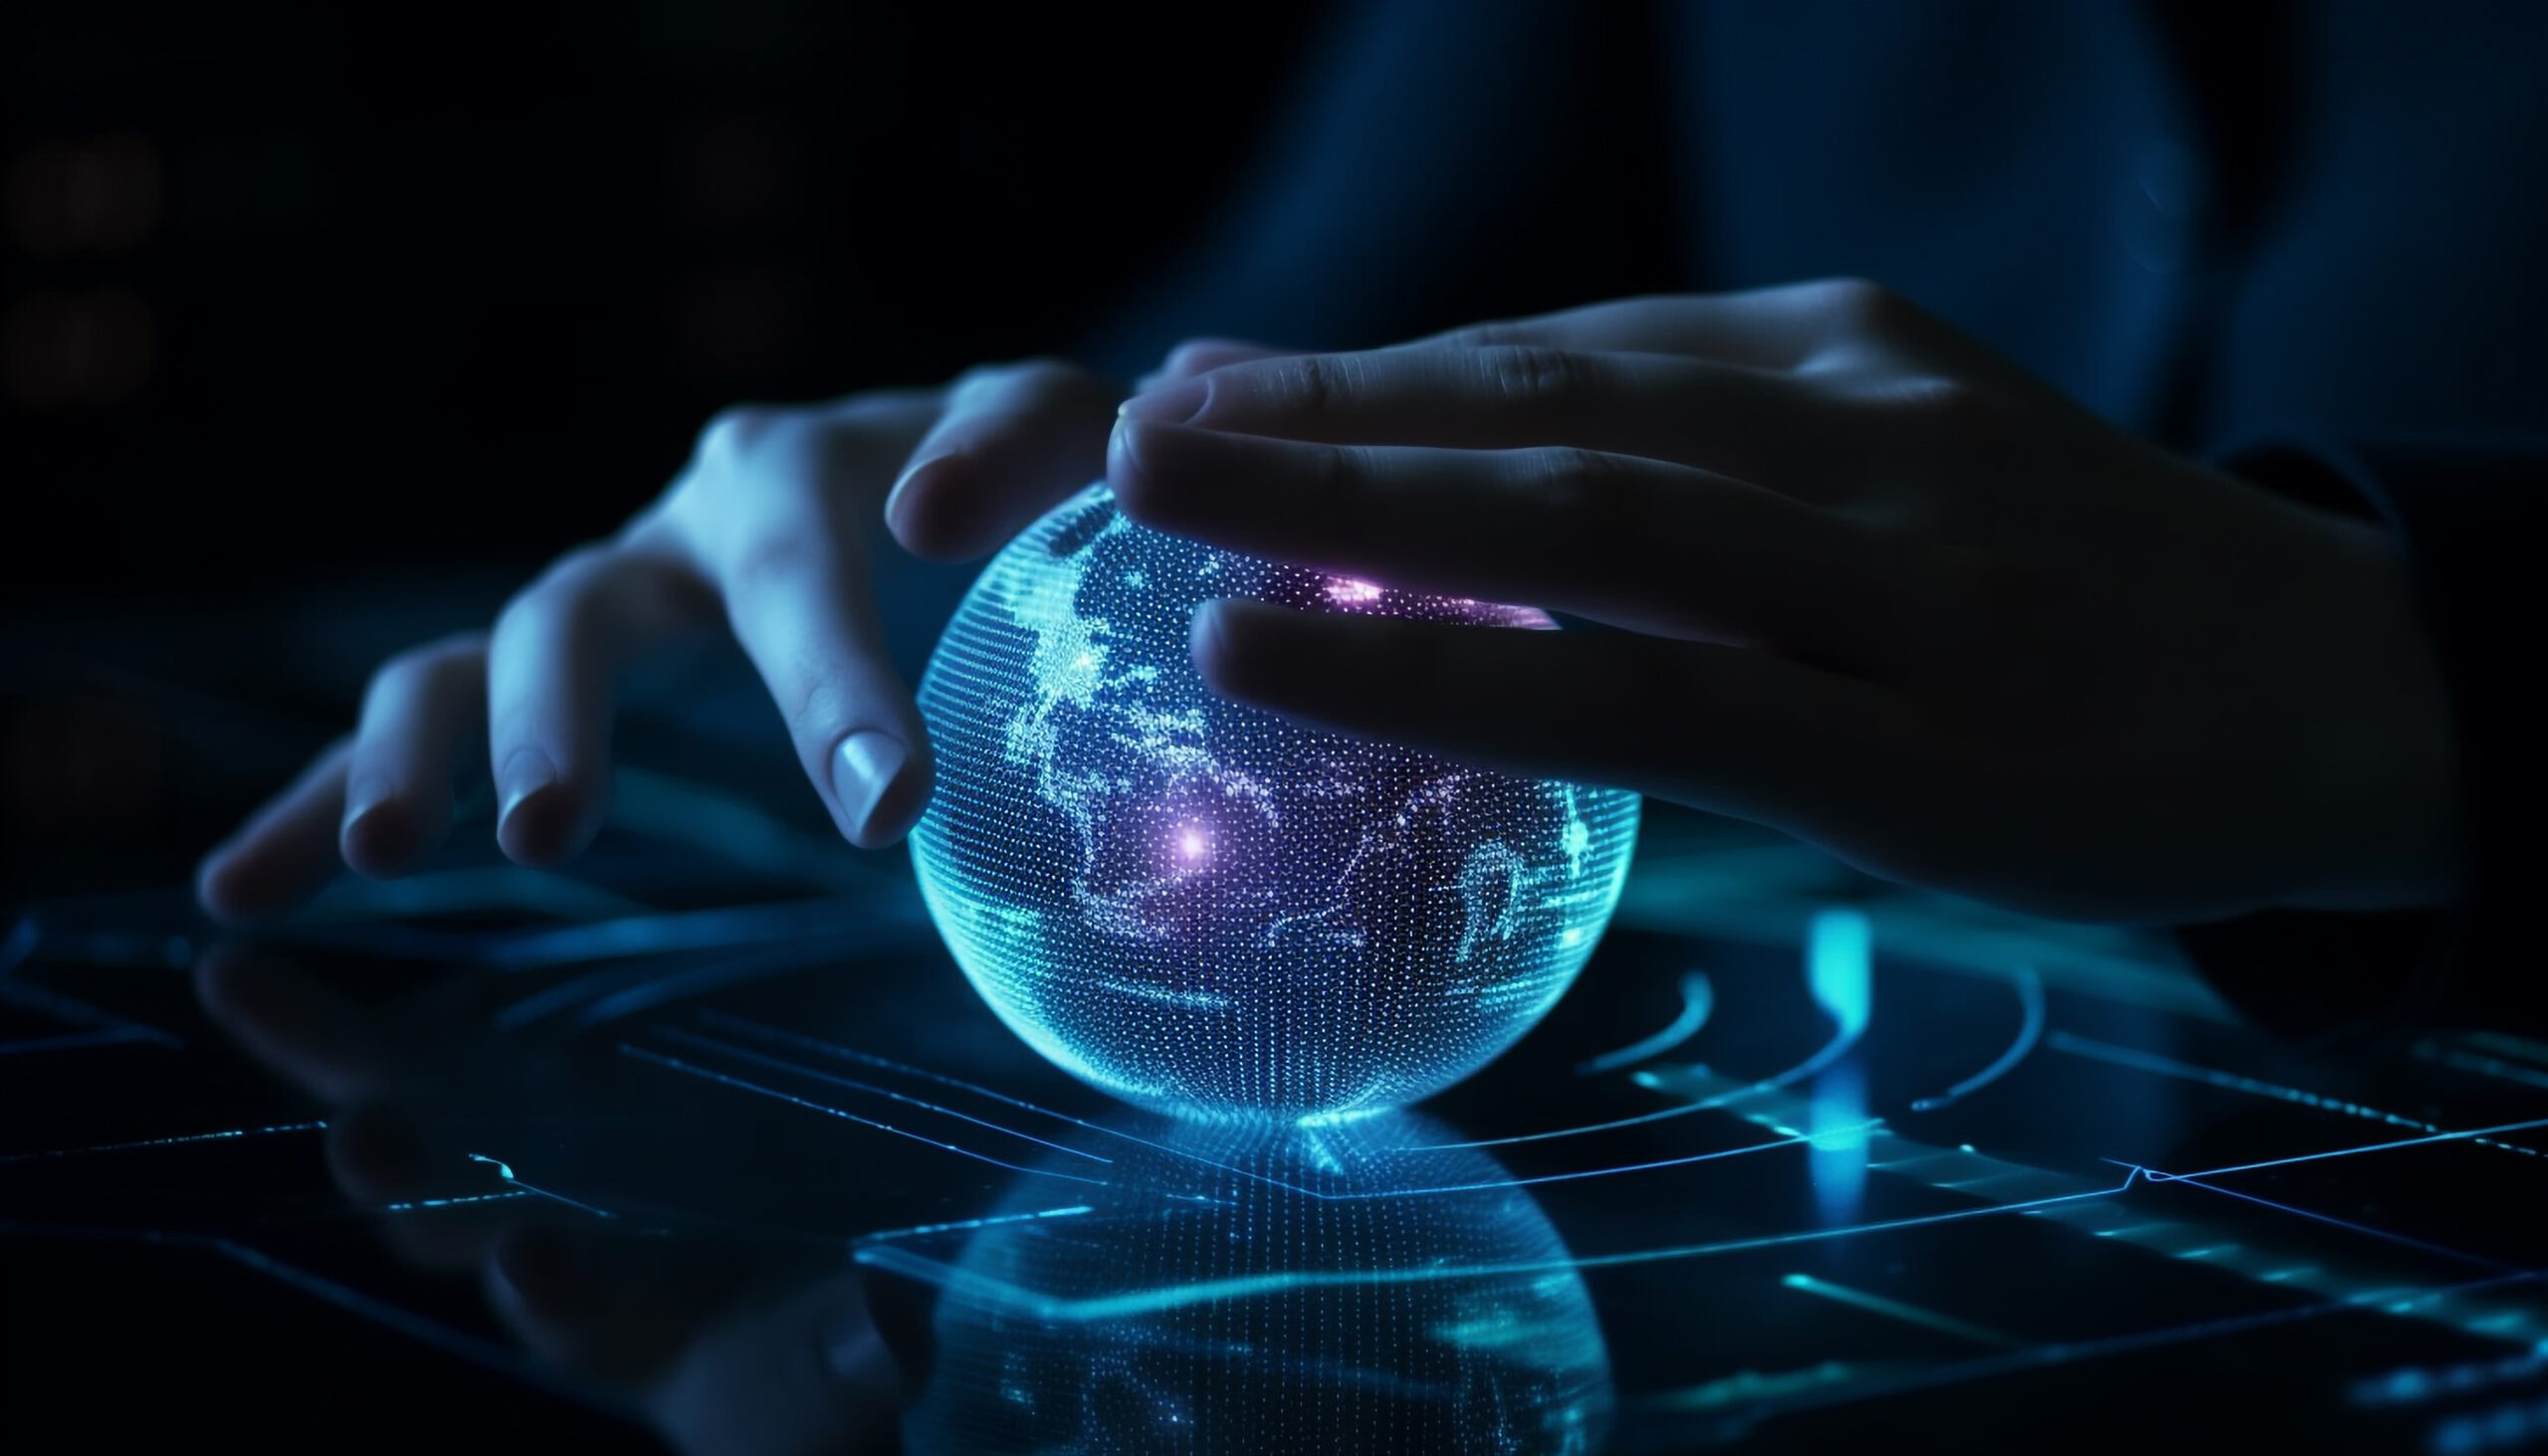 Glowing blue sphere held by human hand generated by artificial intelligence